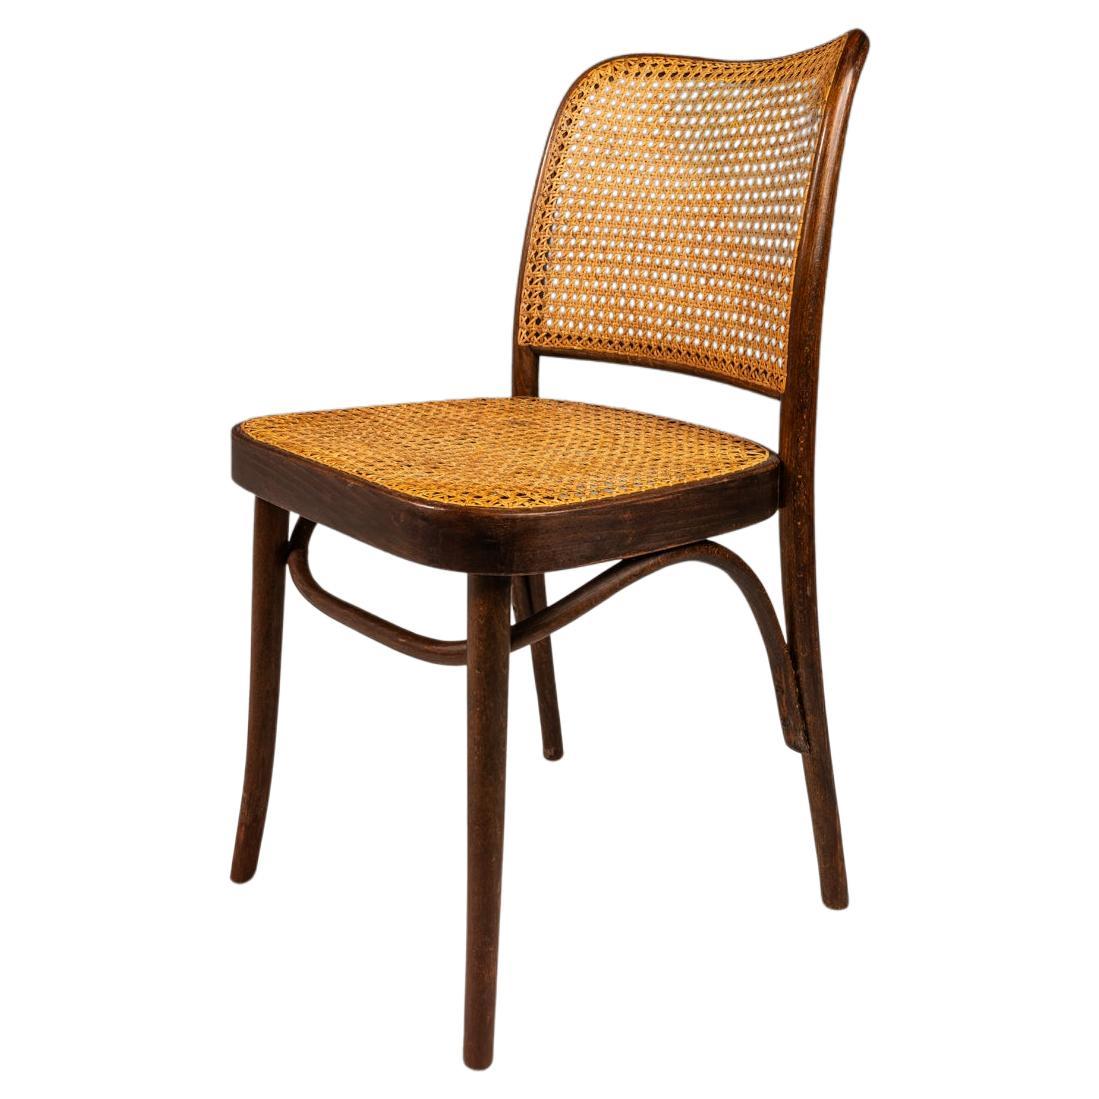 Bentwood Prague Model 811 Chair in Walnut by Josef Frank, Poland, c. 1960s For Sale